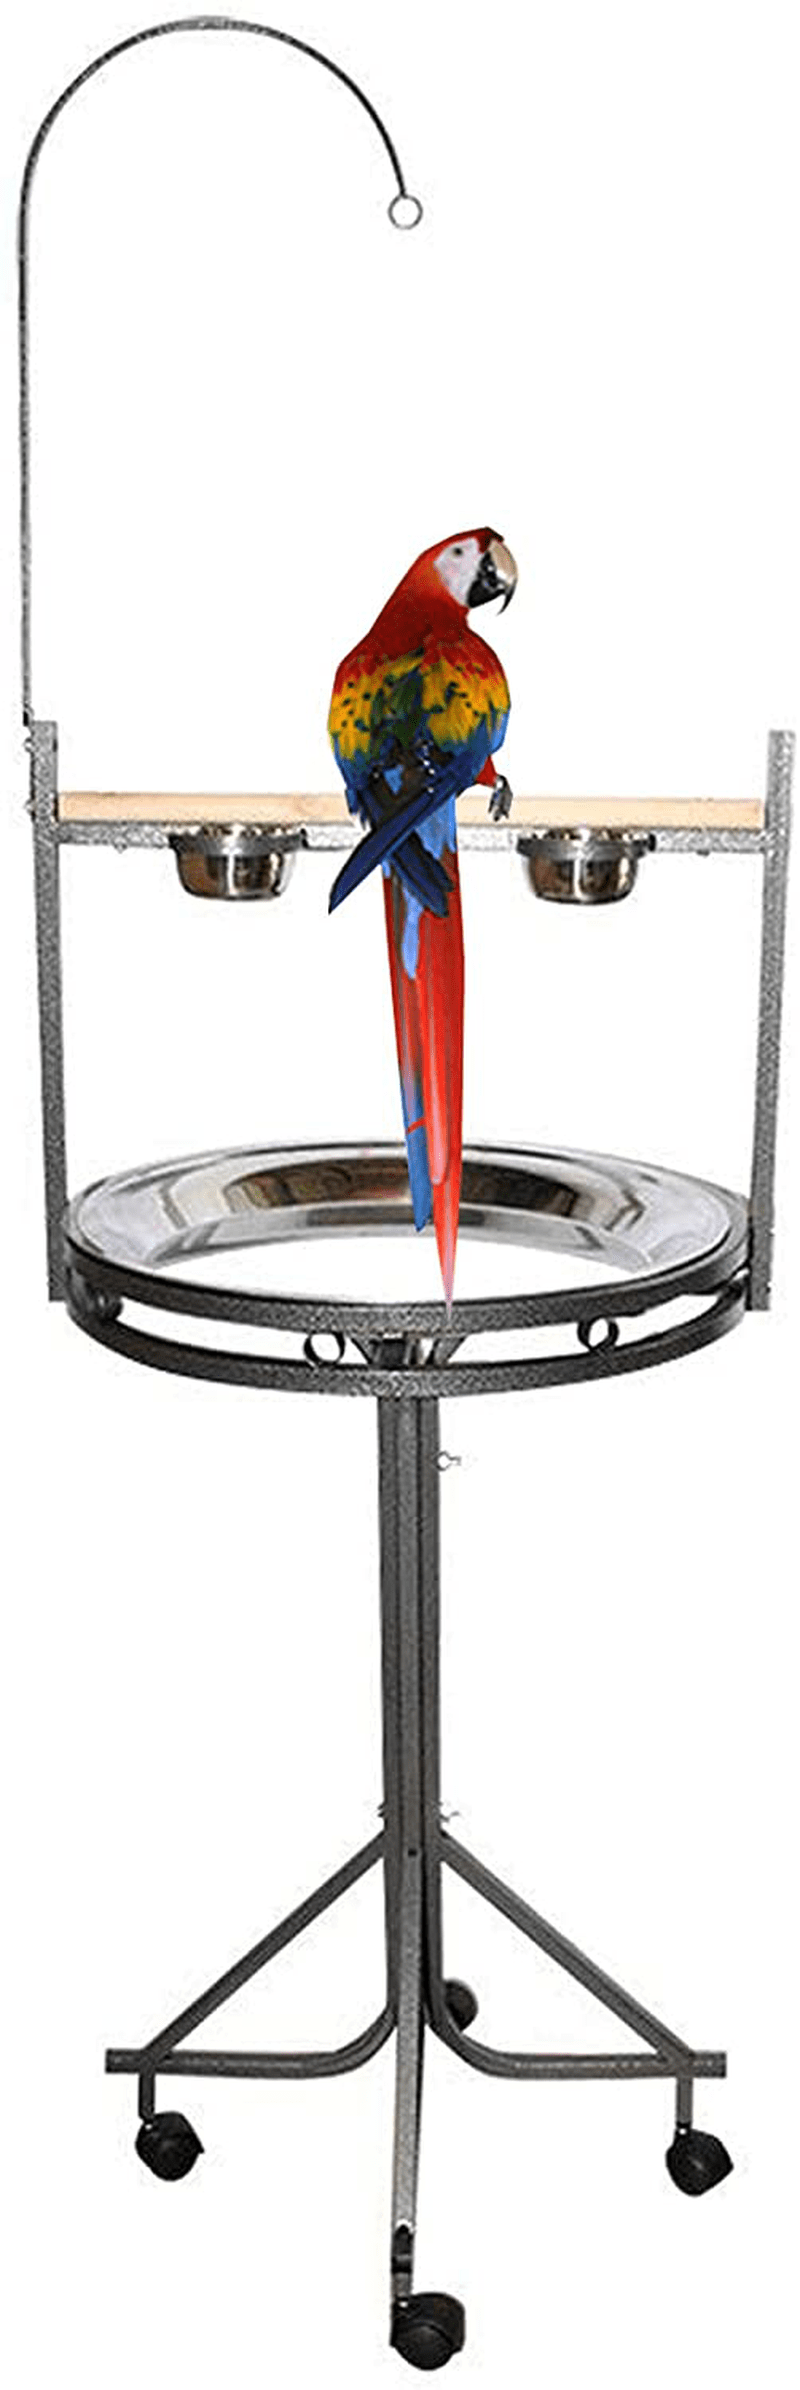 72" Large Hangout Bird Play Stand Play Ground Stainless Steel Pan with Metal Seed Guard